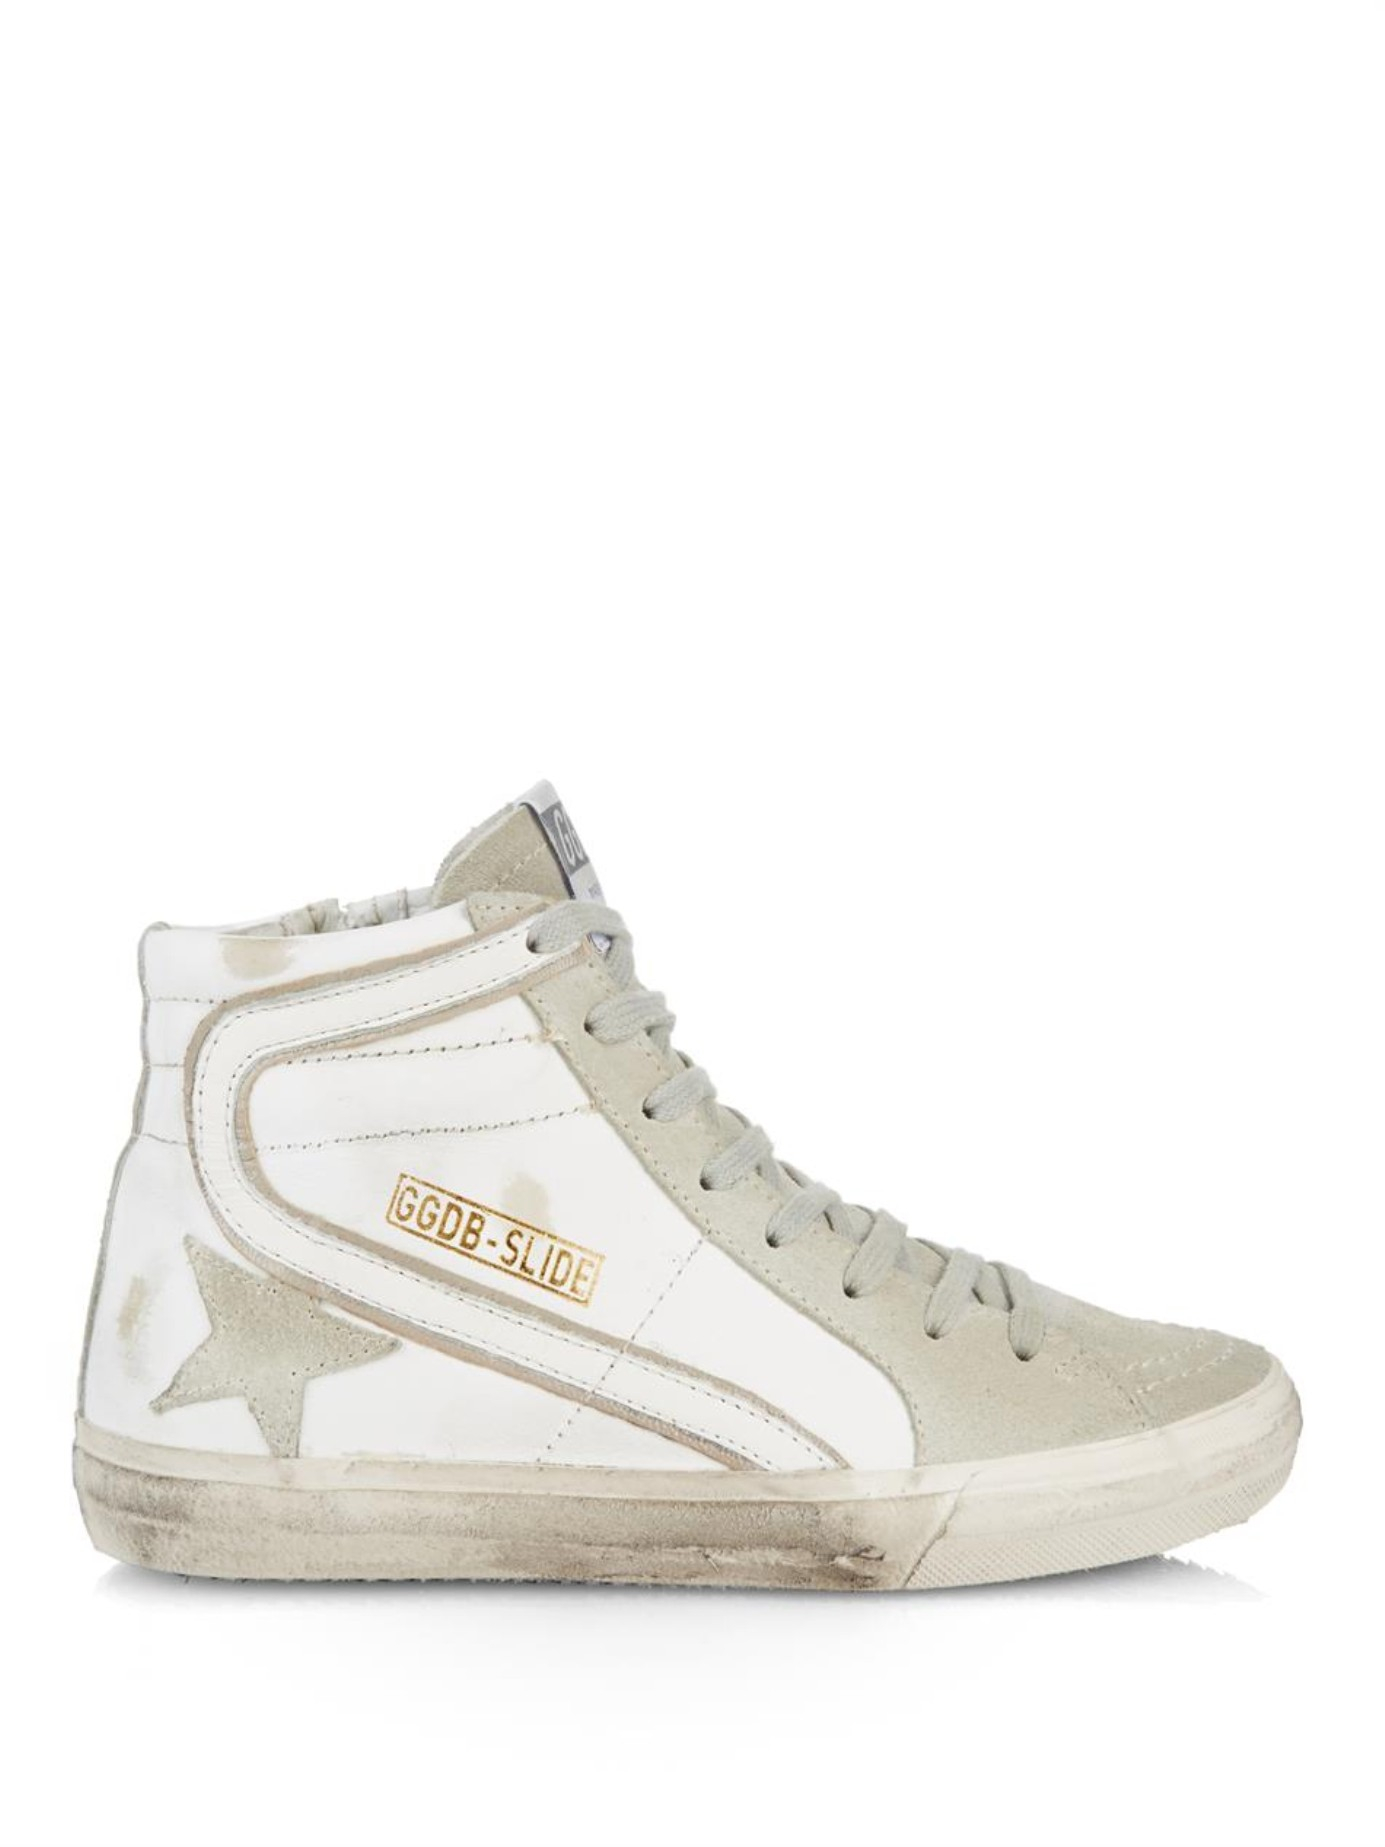 Golden Goose Black High Tops / Golden Goose Francy High Tops Herren Sneakers - Gold ... / You can request an appointment at a golden goose store to discover our collection and receive the dedicated attention of our staff.